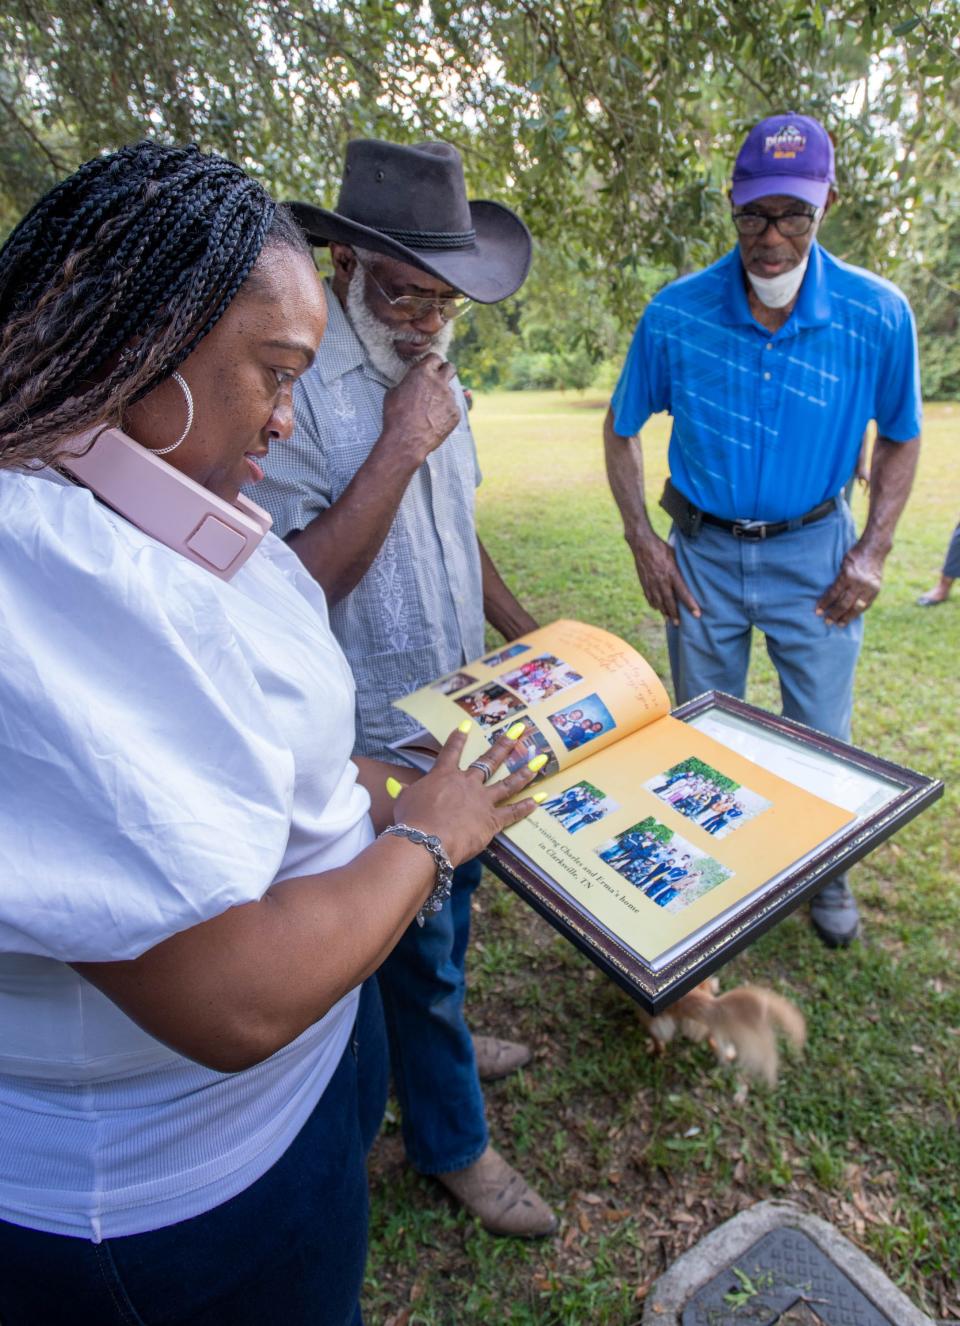 From right, Gus Rich looks on as Charles Smith and Kasey Cunningham look through a photo book while discussing family history along Persimmon Hollow Road in Milton on Friday, Aug. 18, 2023.